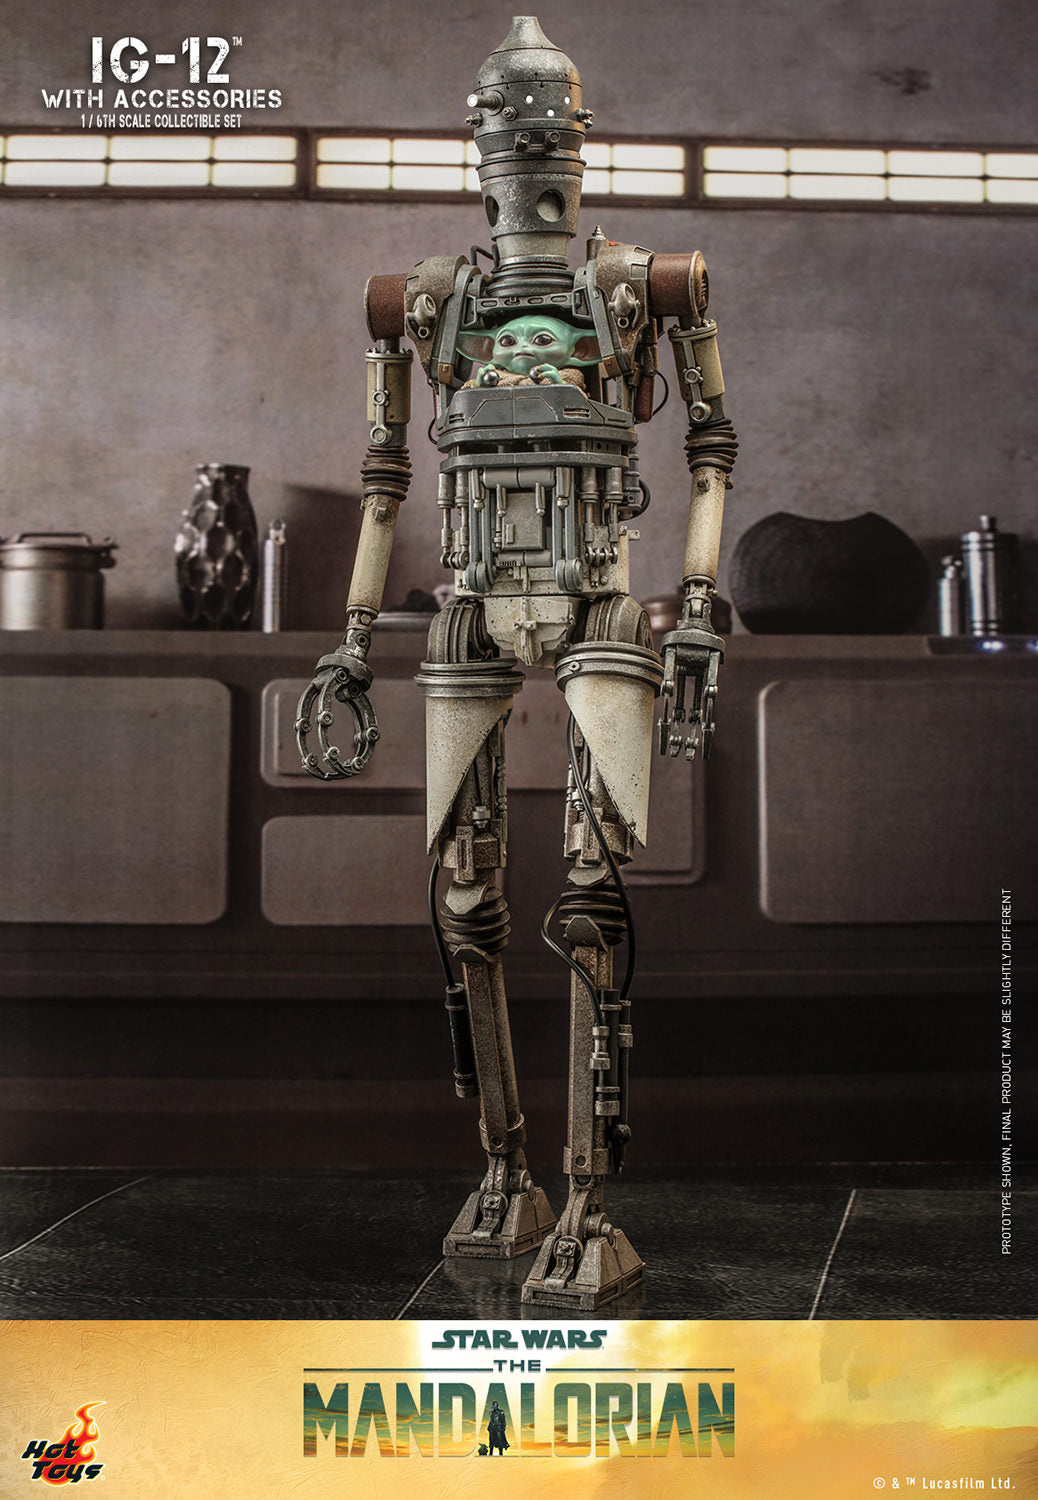 *Pre-Order* IG-12 & Grogu (With Accessories Edition) Star Wars: The Mandalorian 1:6 Hot Toys Figure Set